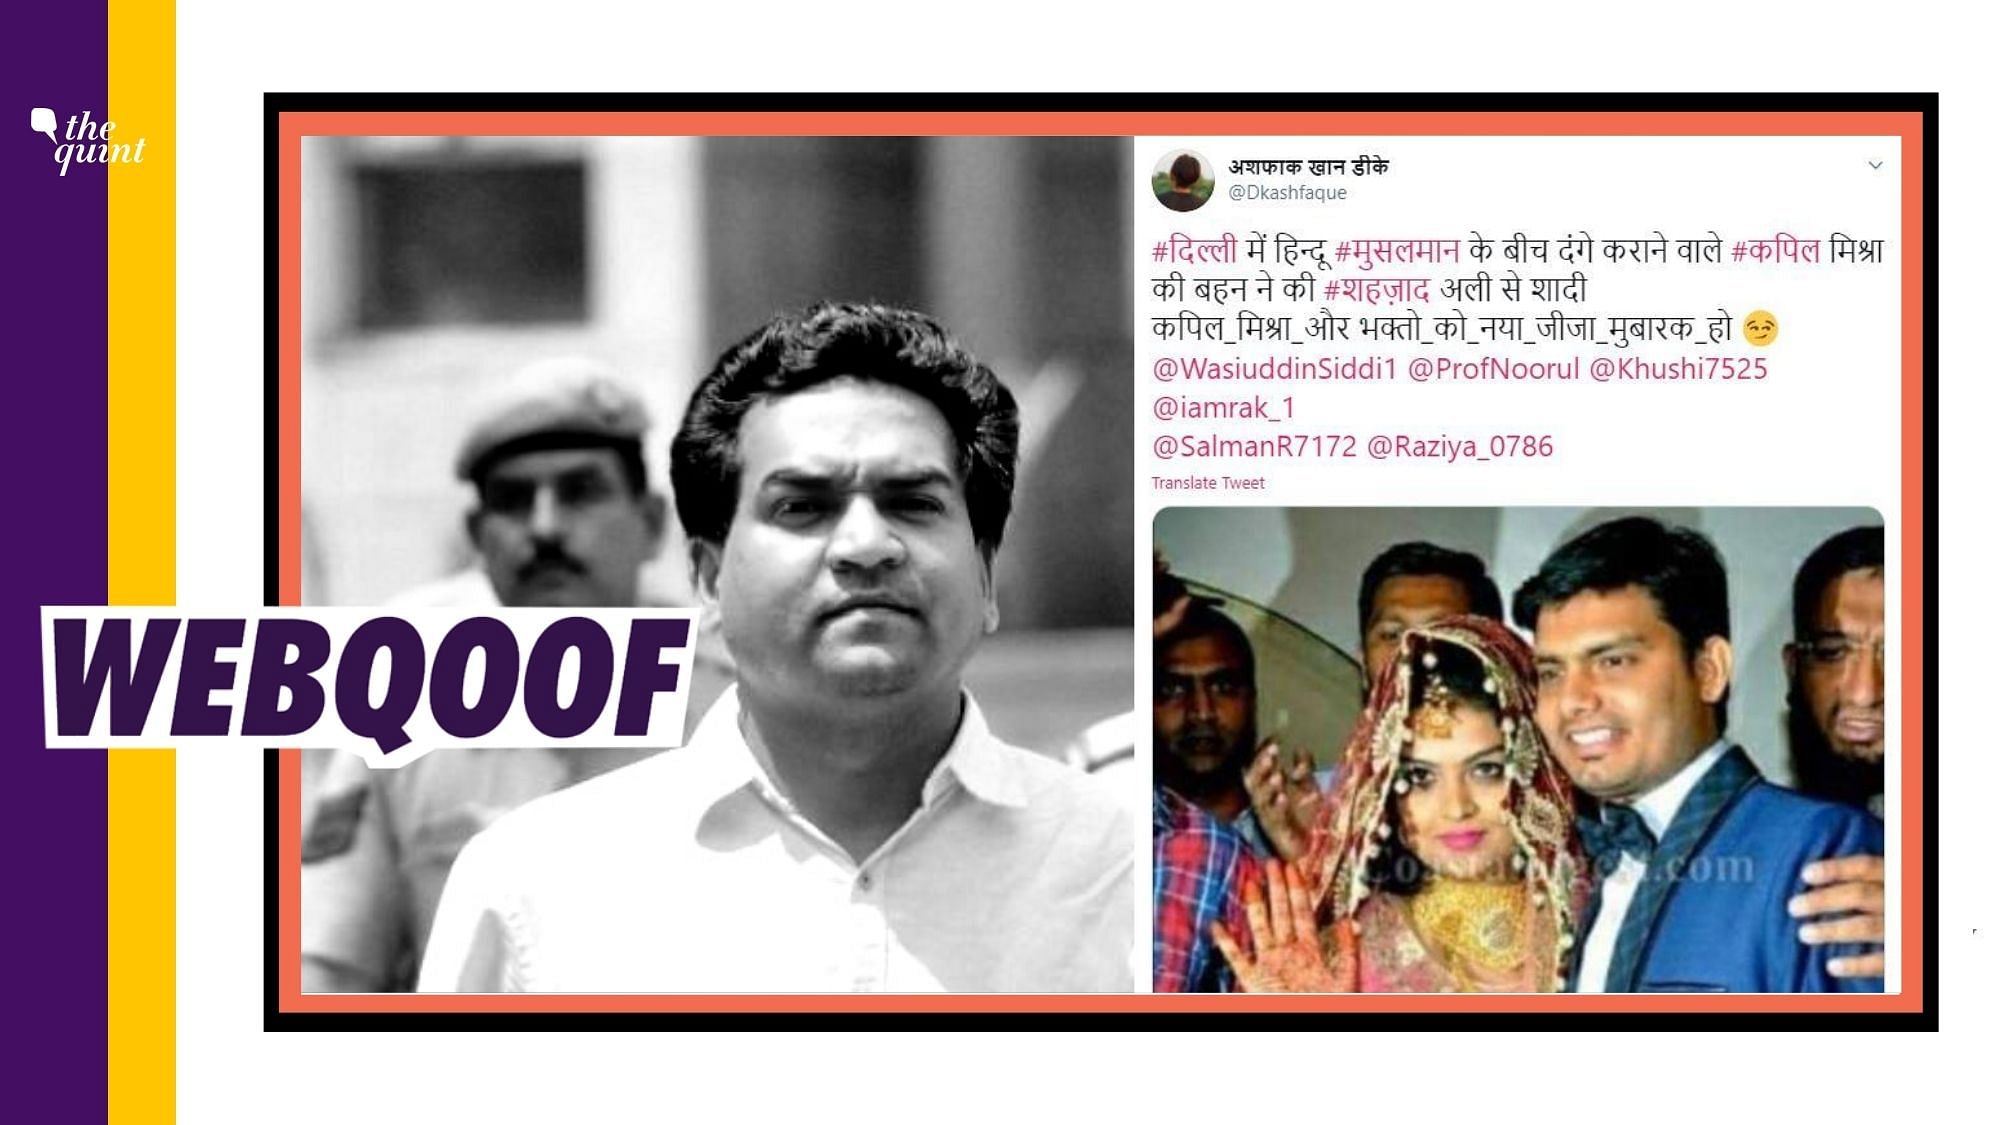 Image of a couple in wedding attire is being shared with a claim that the woman in the photograph is BJP leader Kapil Mishra’s sister who married a Muslim man.